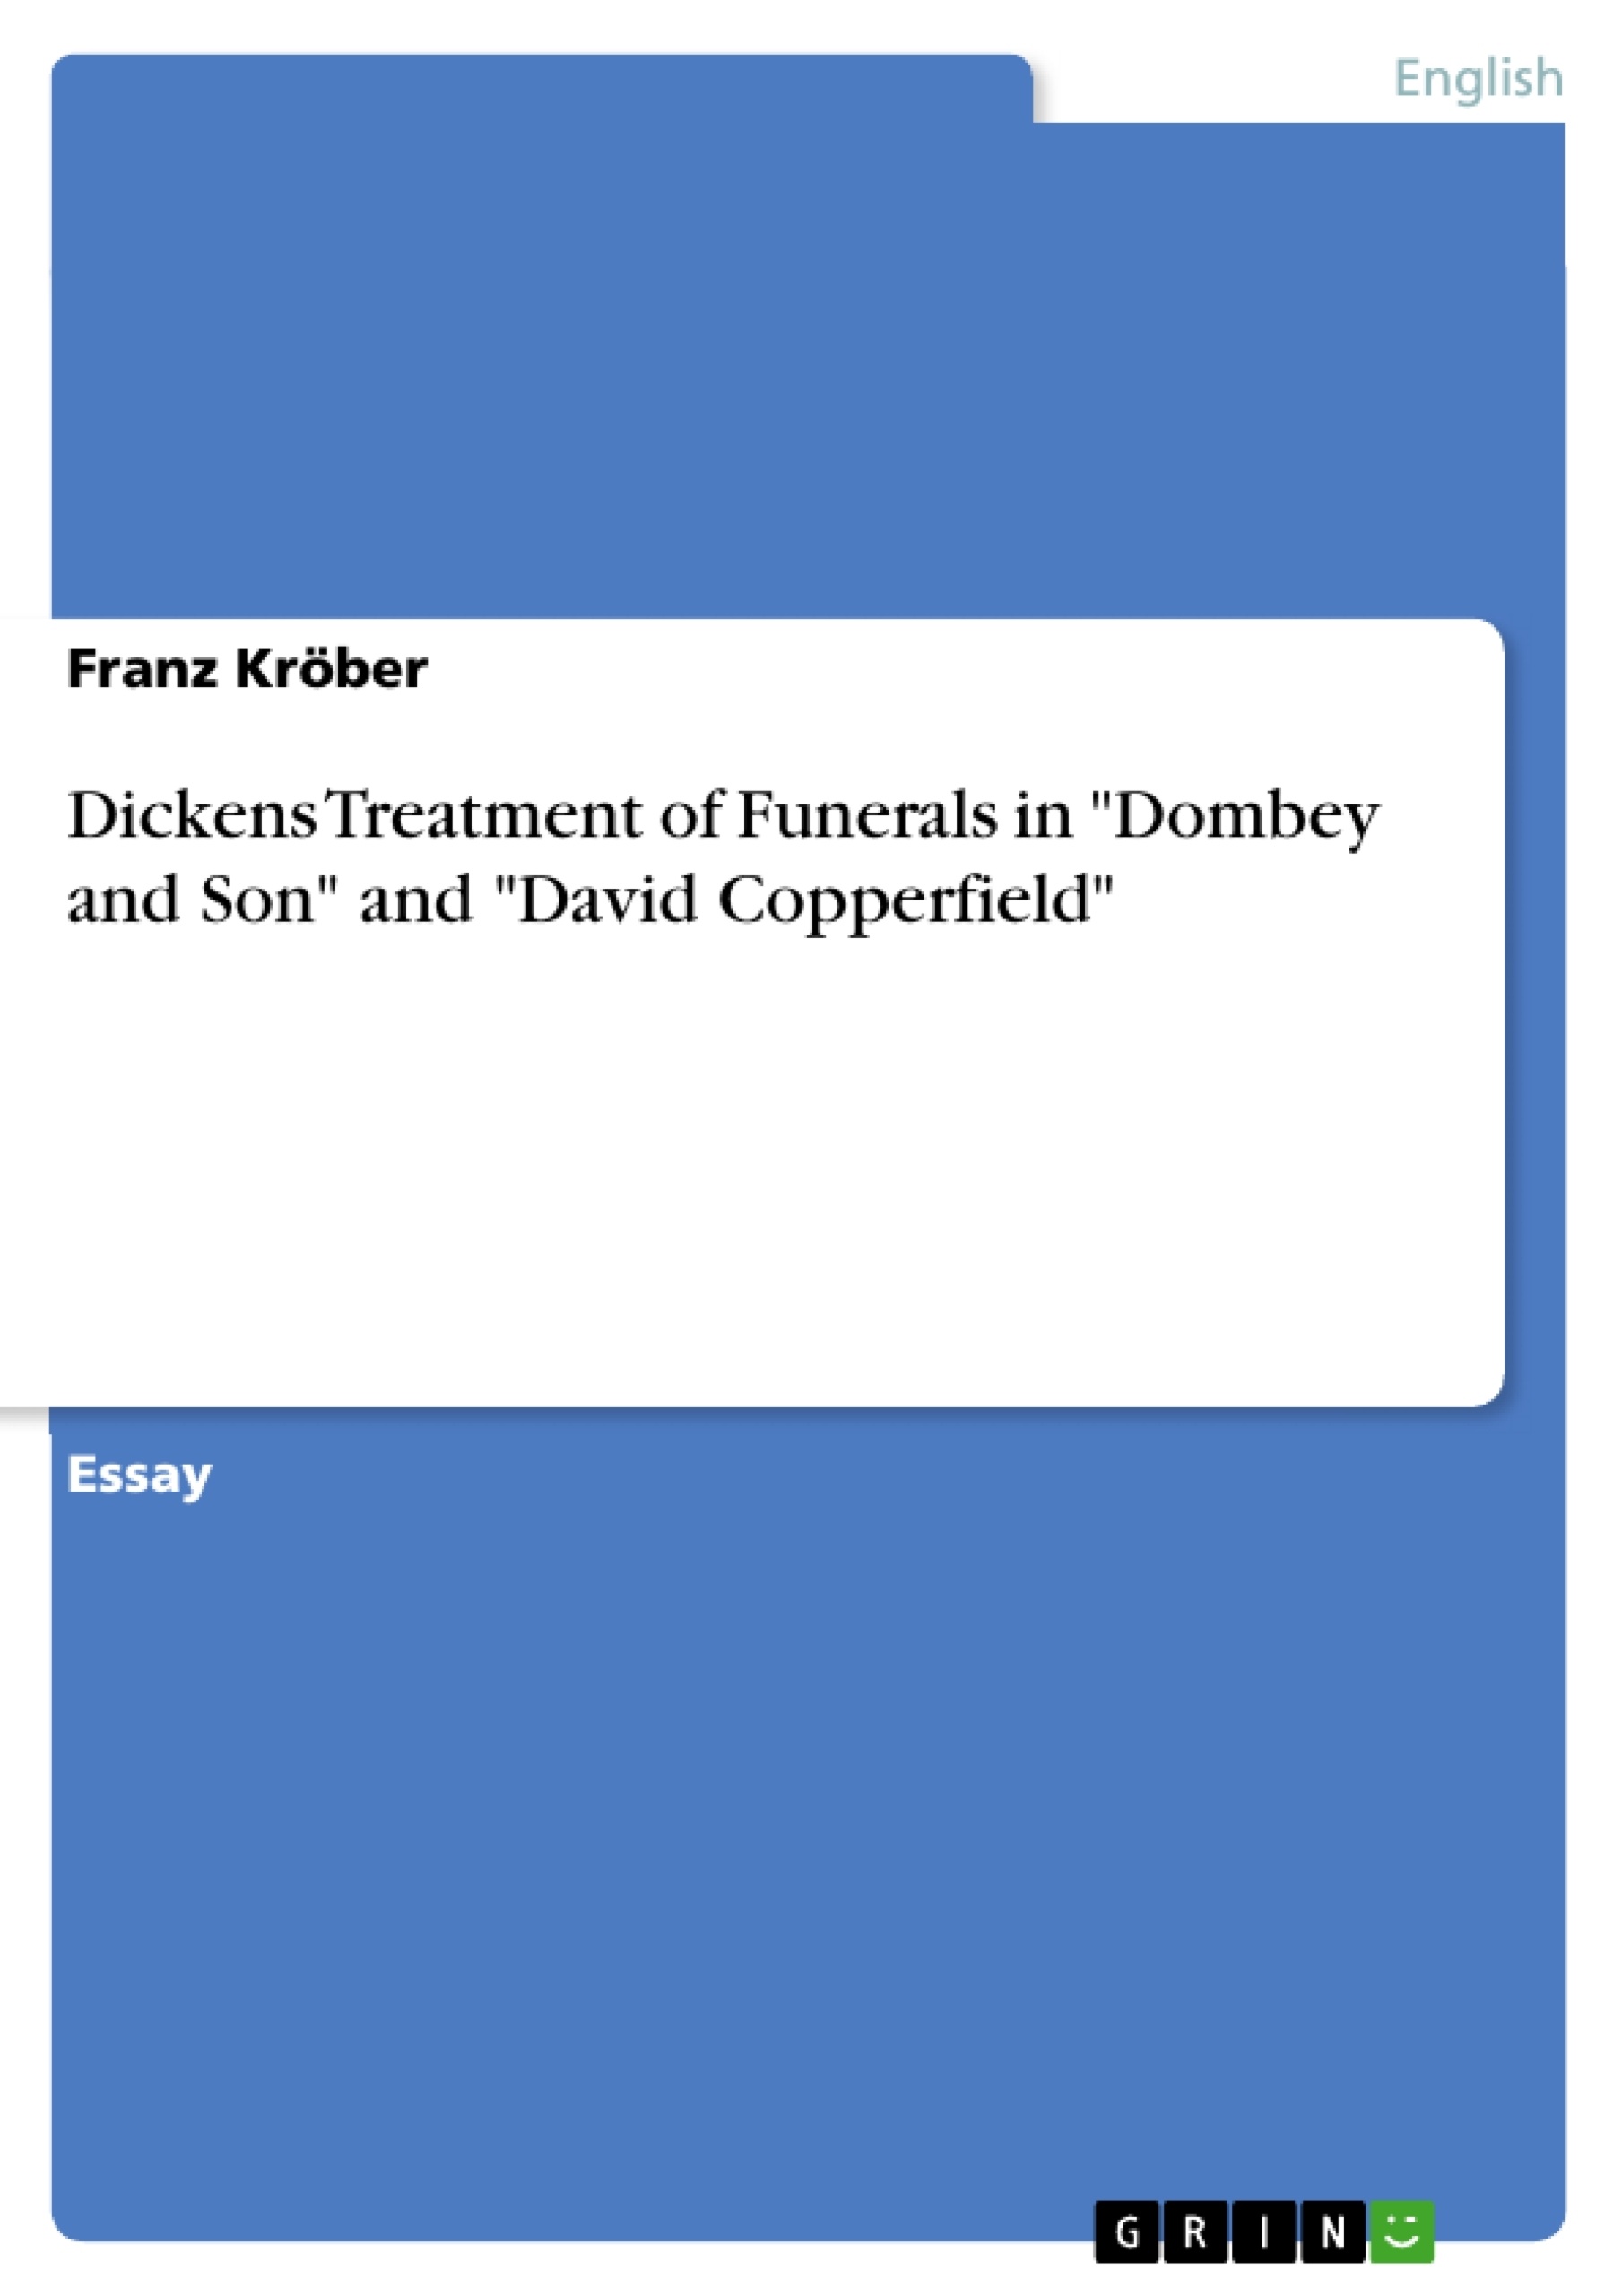 Título: Dickens Treatment of Funerals in "Dombey and Son" and "David Copperfield"